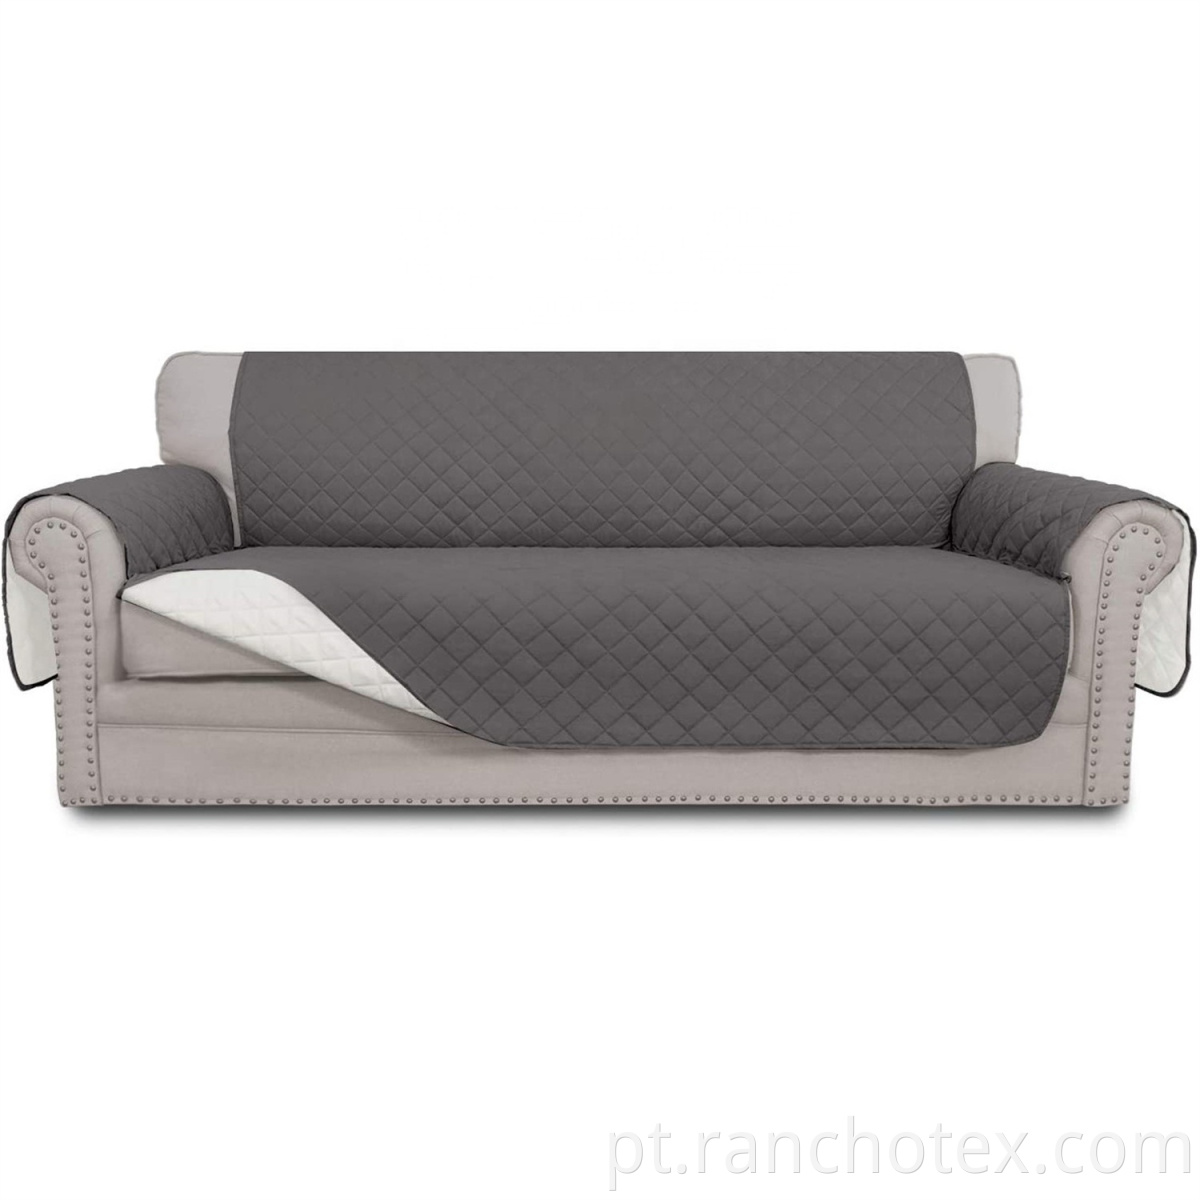 3 Seat Quilted Sofa Cover